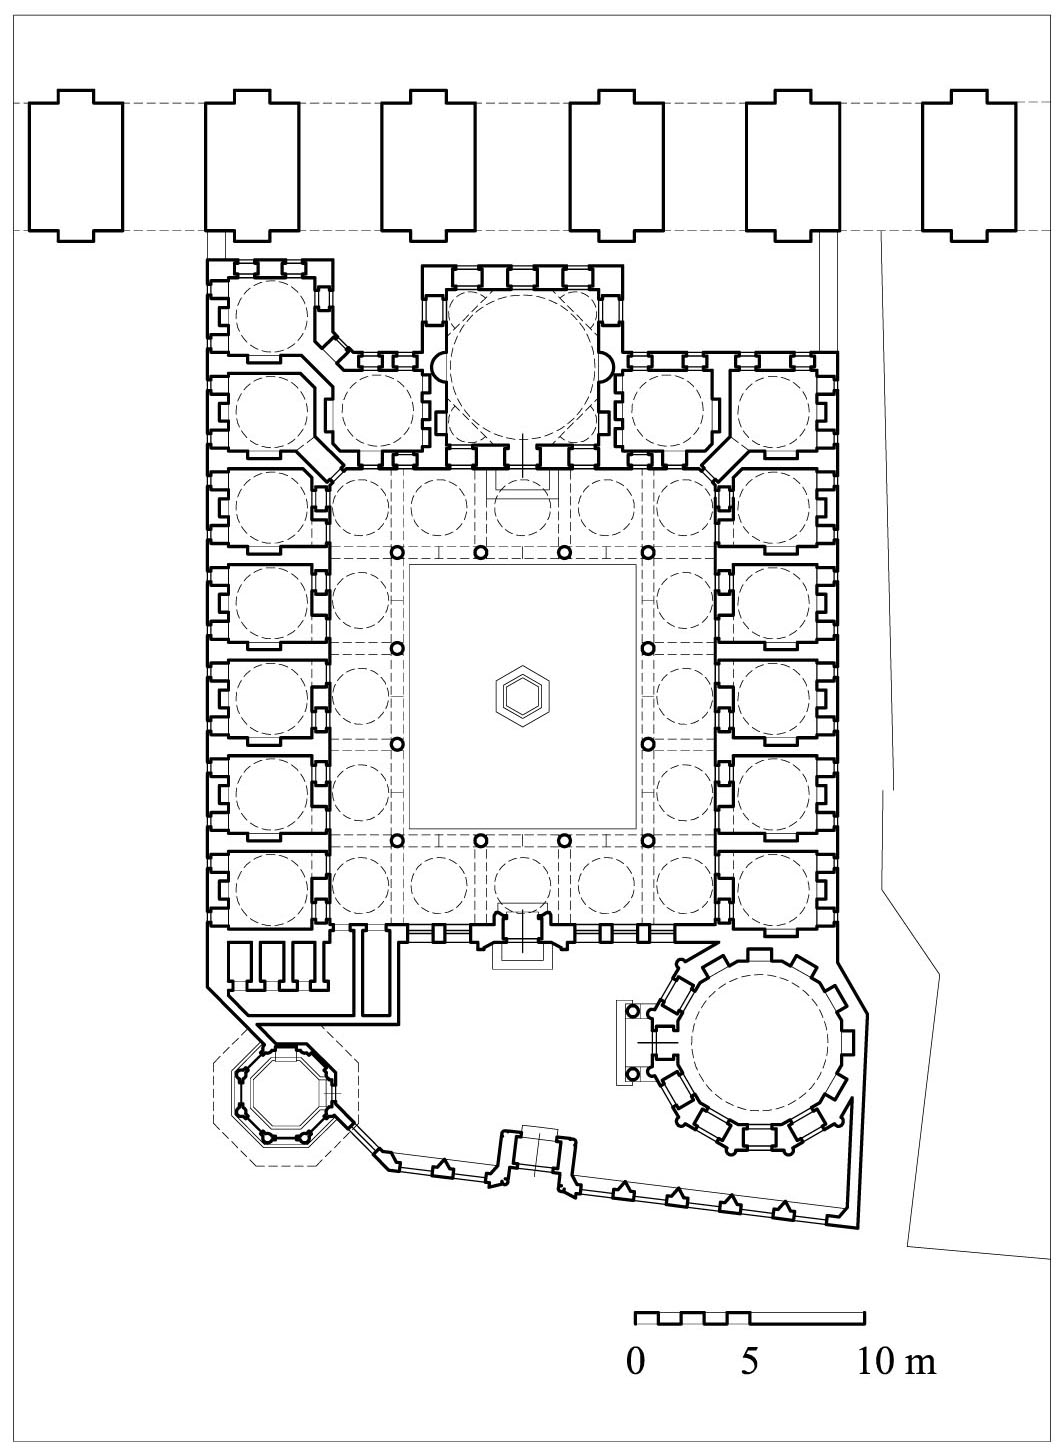 Floor plan of the complex in front of the Valens Aqueduct